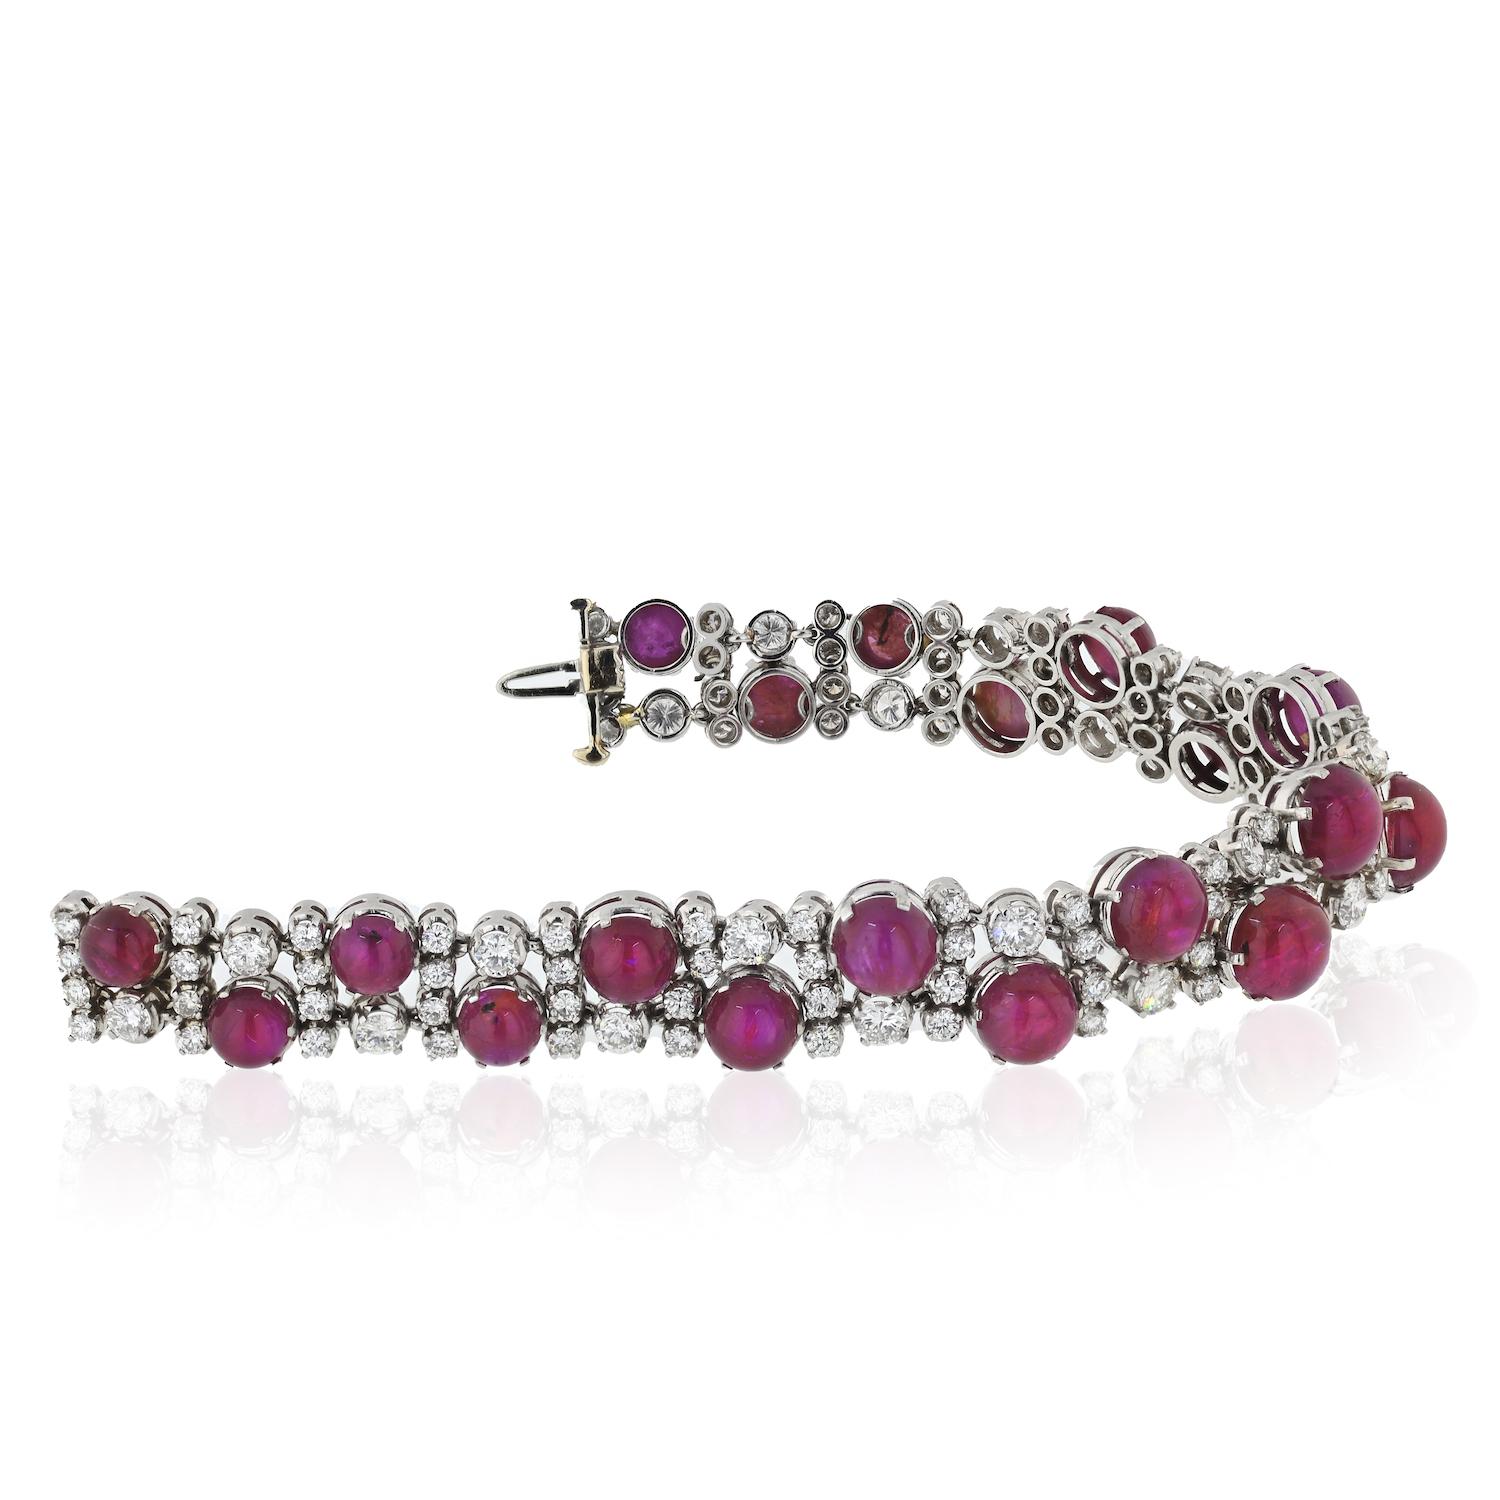 Contemporary diamond and ruby platinum bracelet. Set with brilliant-cut diamonds and cabochon rubies. 
L: 7 inches. More vintage items in our 1stDibs closet: David Webb, Tiffany, Cartier, retro, vintage, estate, and more. Contact us for more details